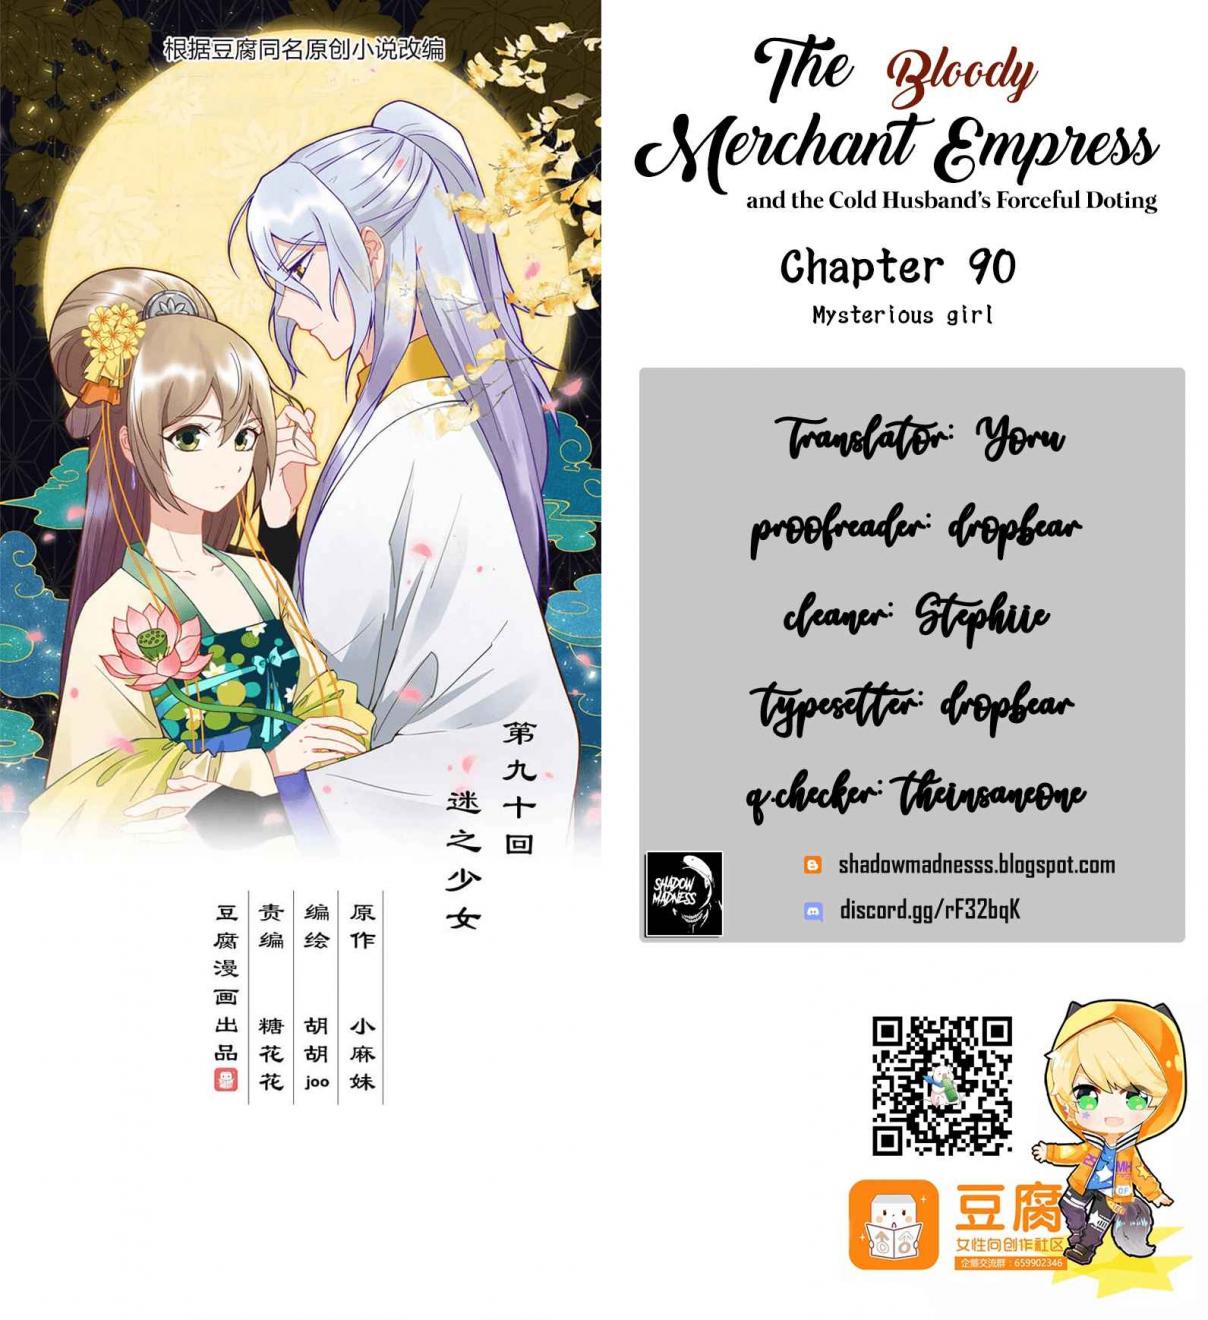 The Bloody Merchant Empress and the Cold Husband's Forceful Doting Ch. 90 Mysterious girl